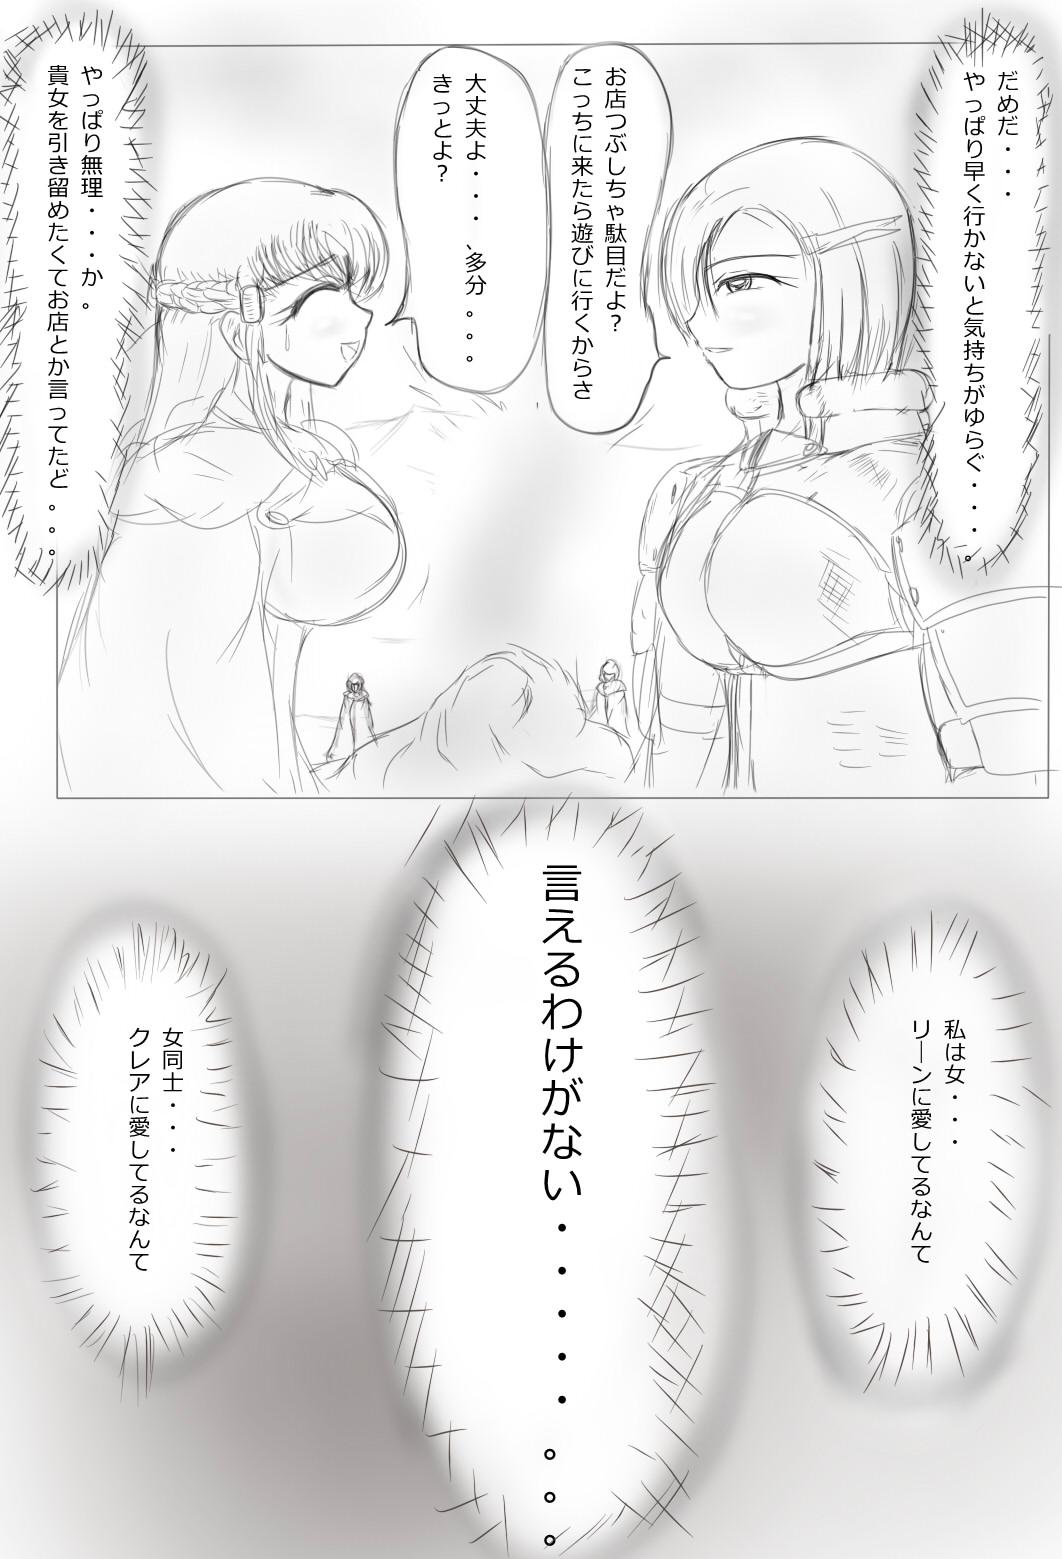 POV [がんすきー] Claire to Rin ~Inma no Nie~ Ch. 1-2 Vibrator - Page 3